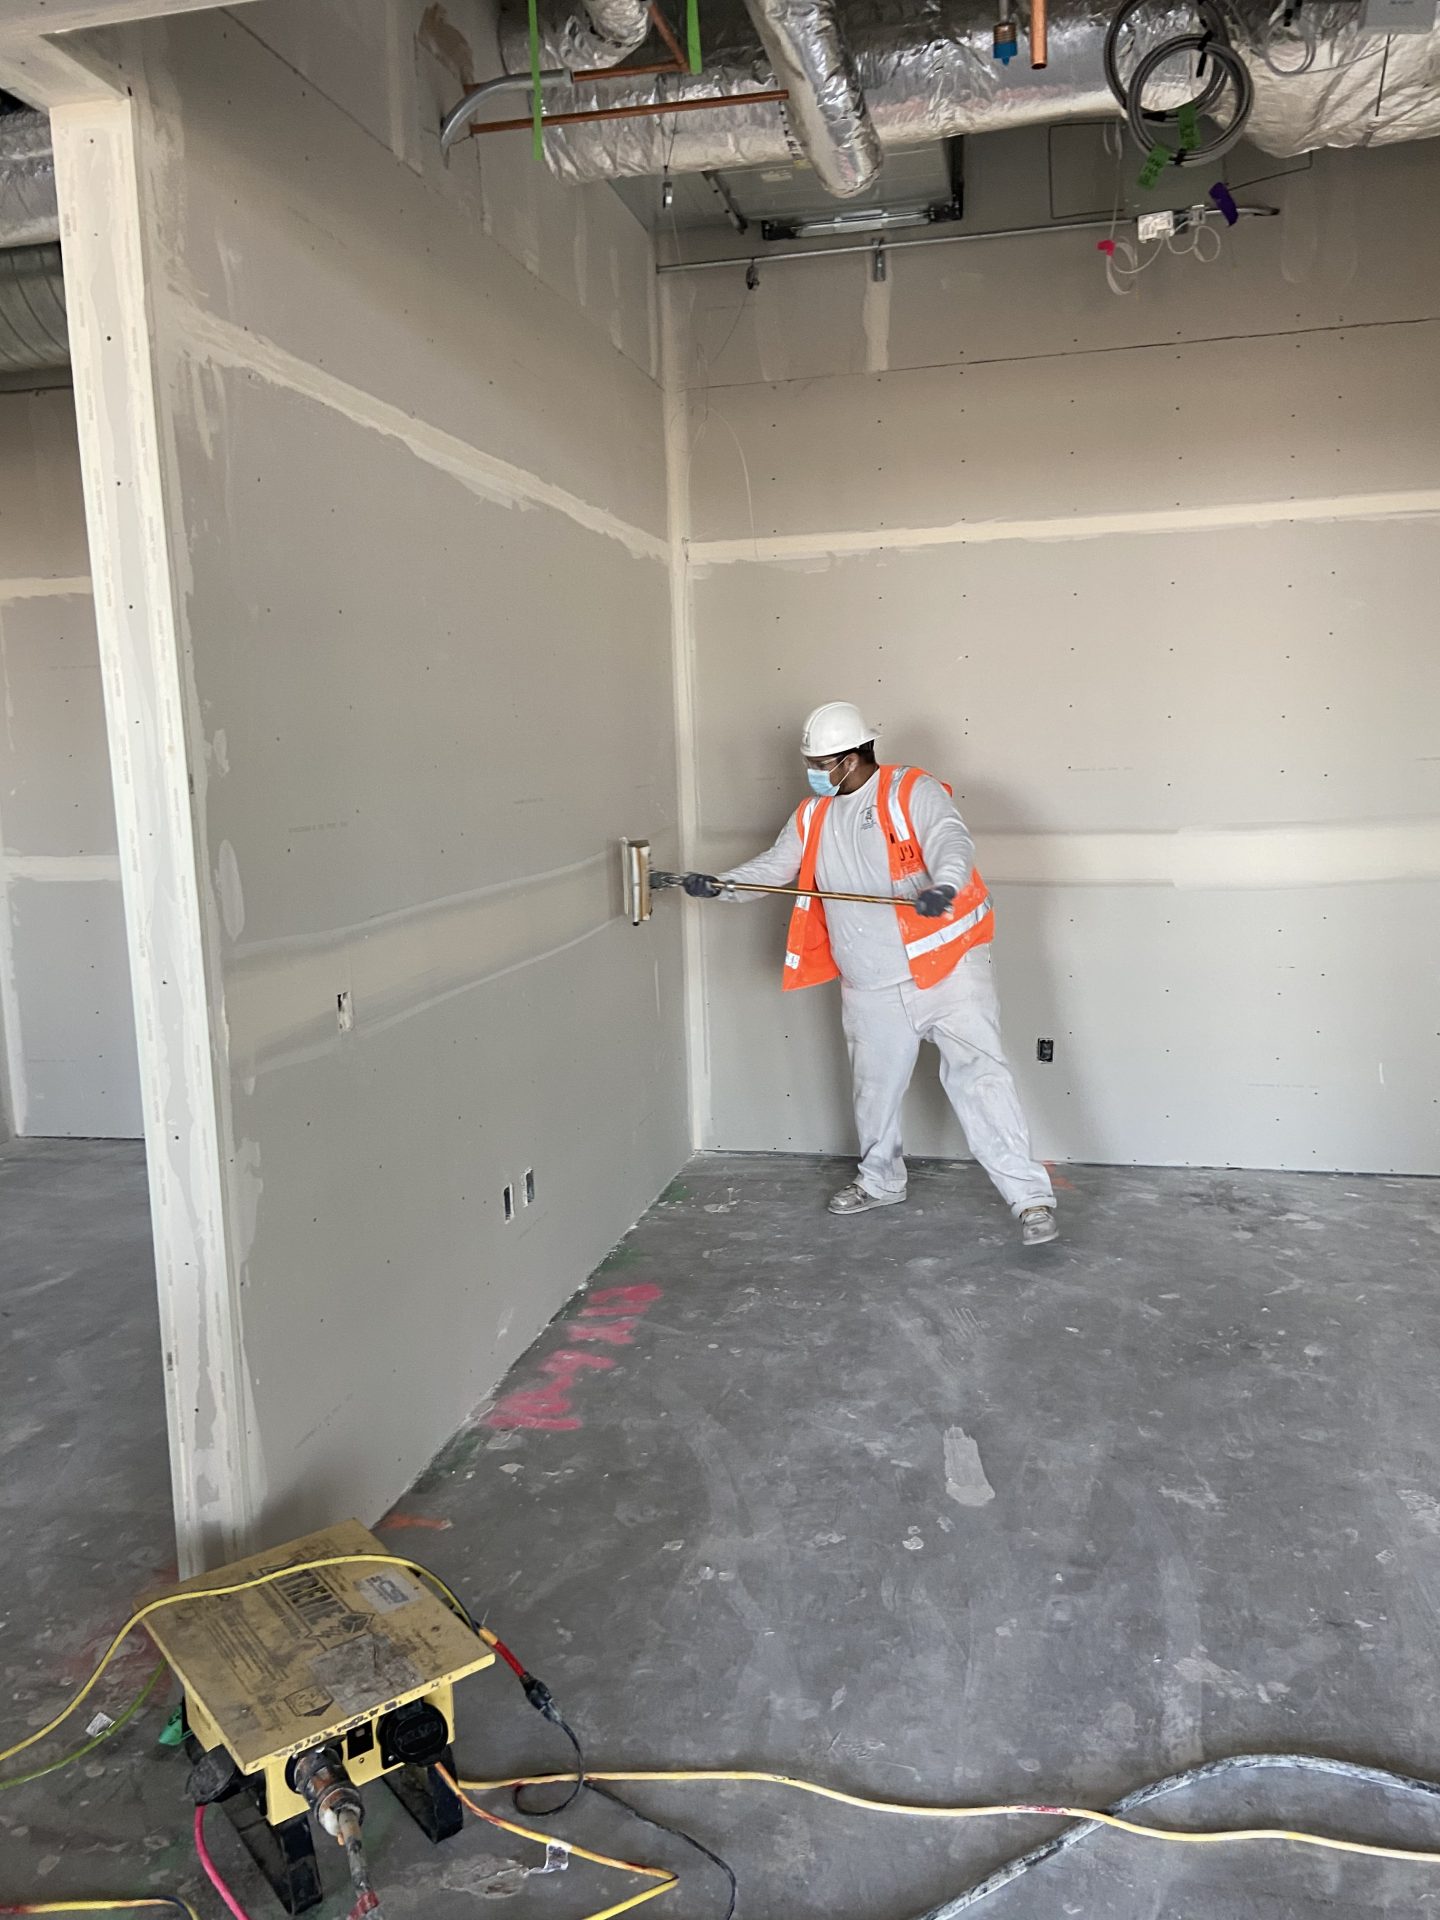 Image from the Gallery: Drywall Finishers 2020